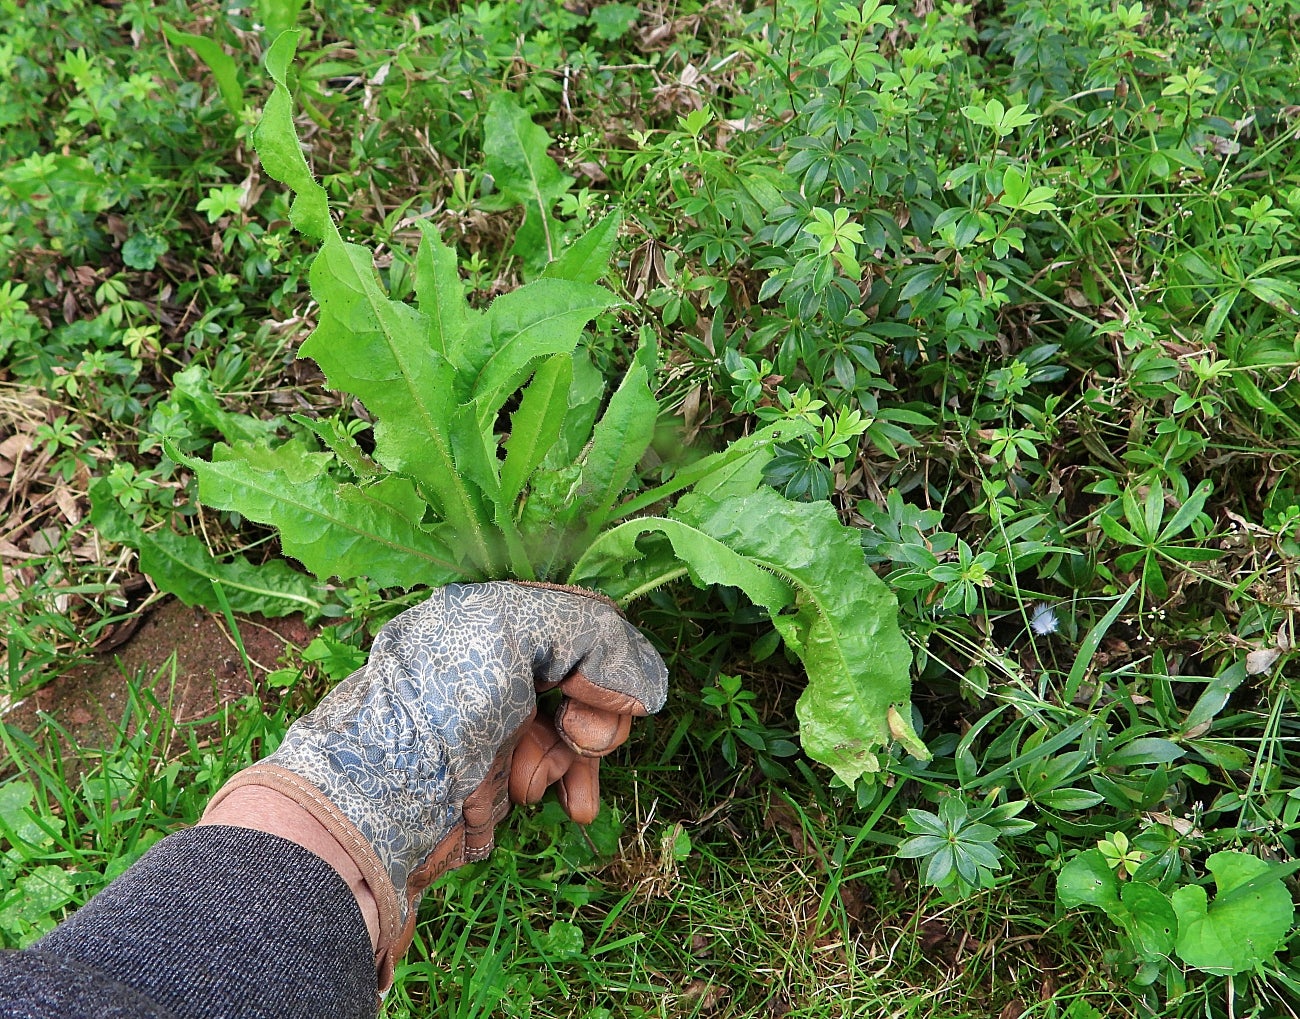 A hand pulling up weeds.